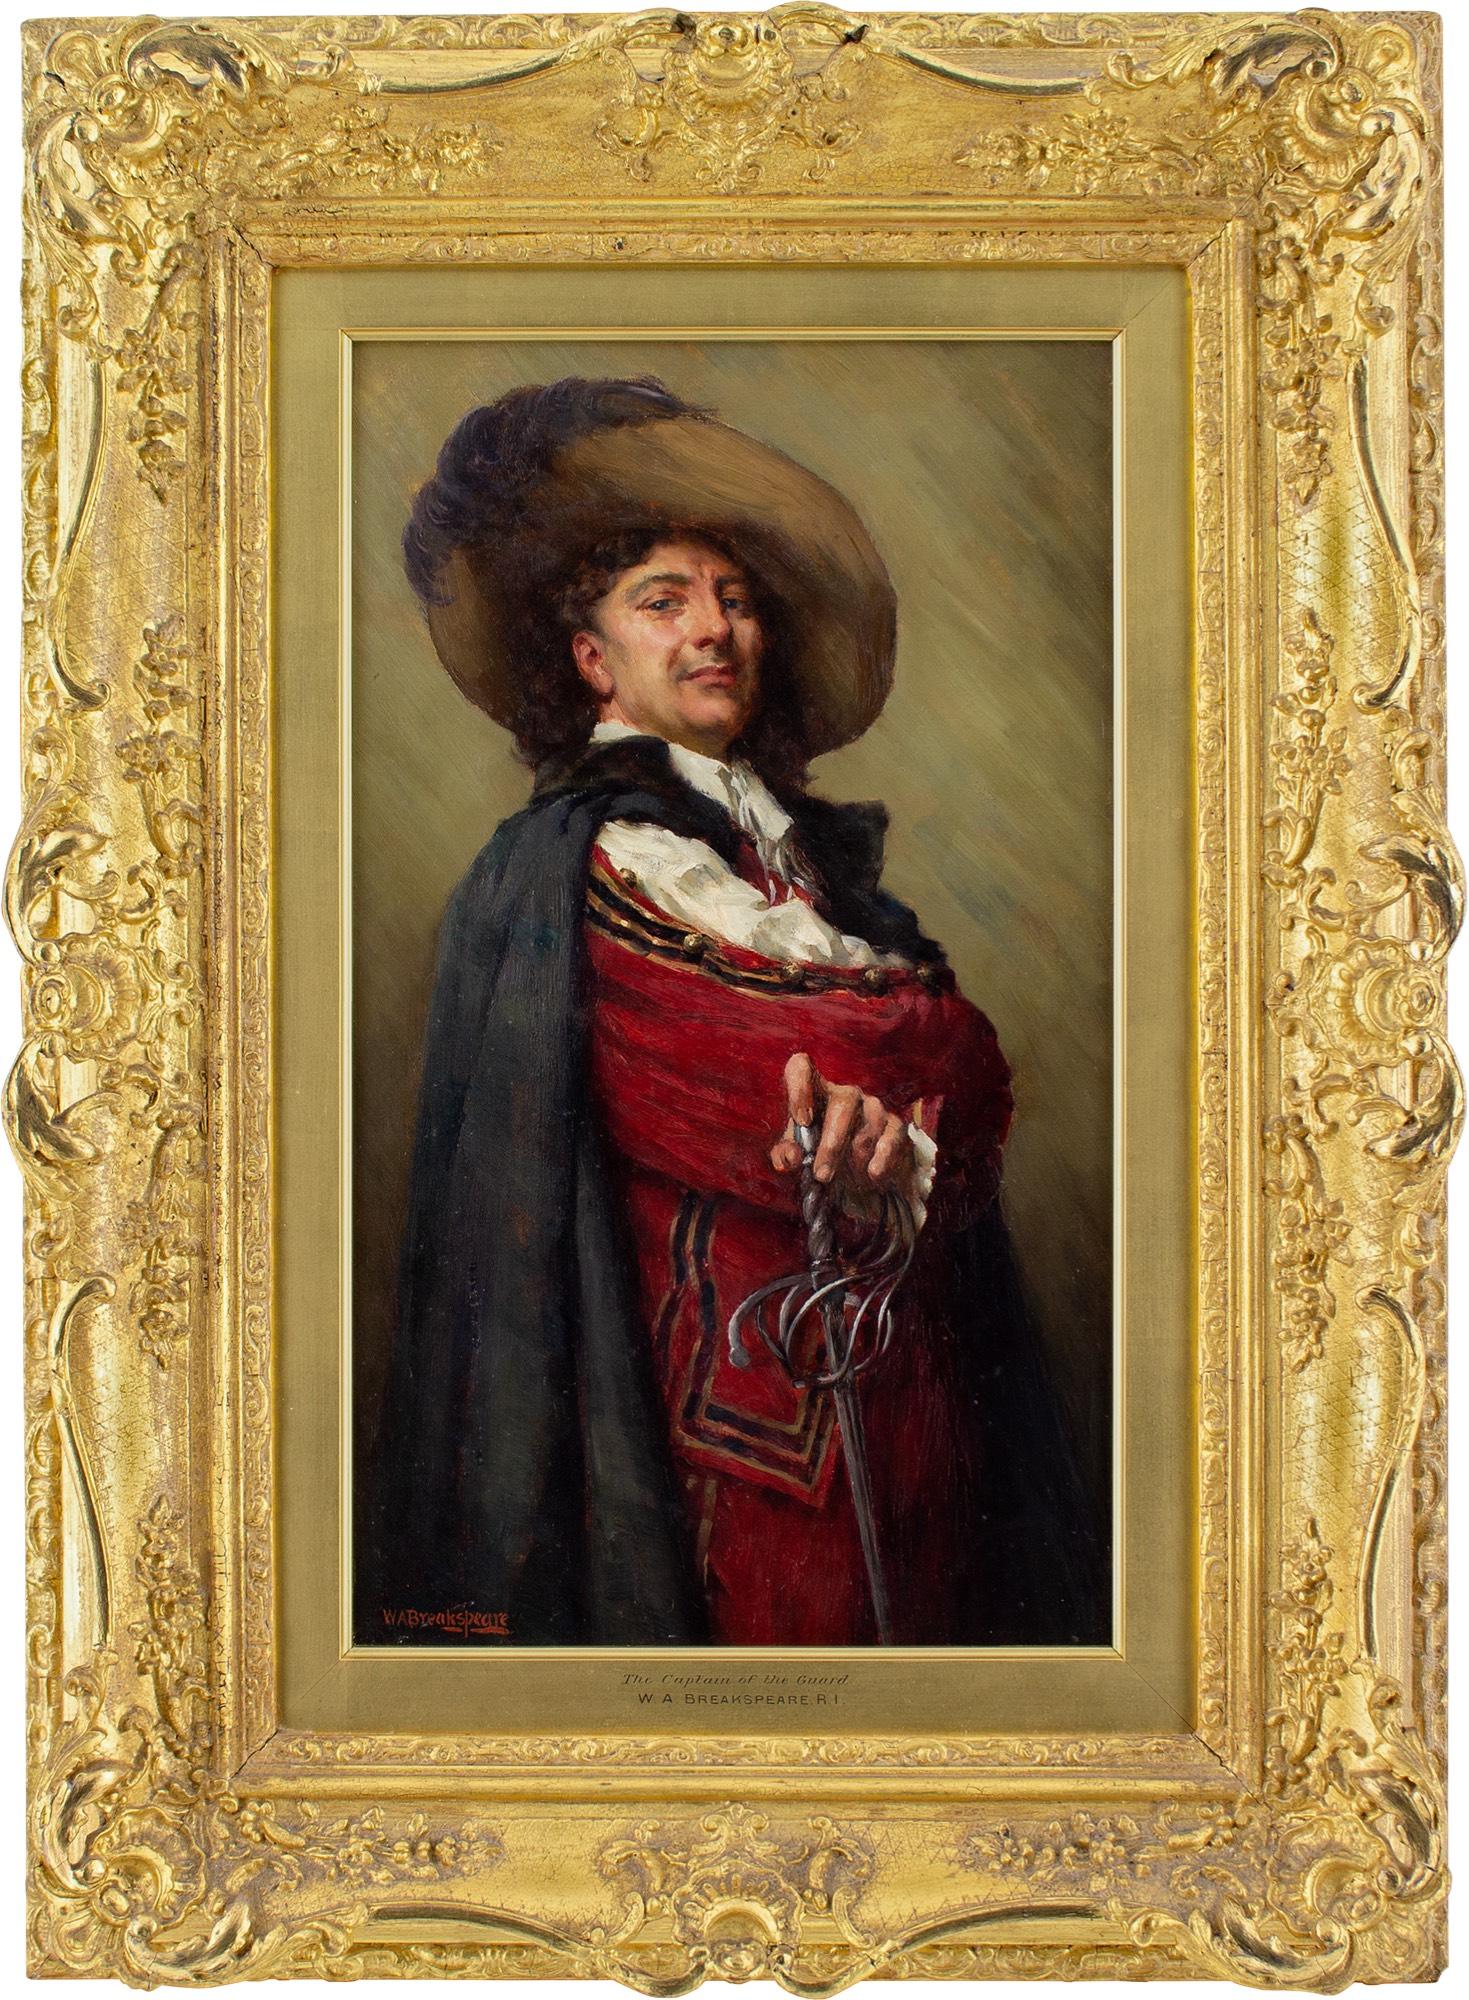 This early 20th-century oil painting by British artist William Arthur Breakspeare RBA RBSA ROI (1855-1914) depicts an upstanding self-assured cavalier with his arms folded.

Breakspeare was a distinguished painter of figures, genre scenes and